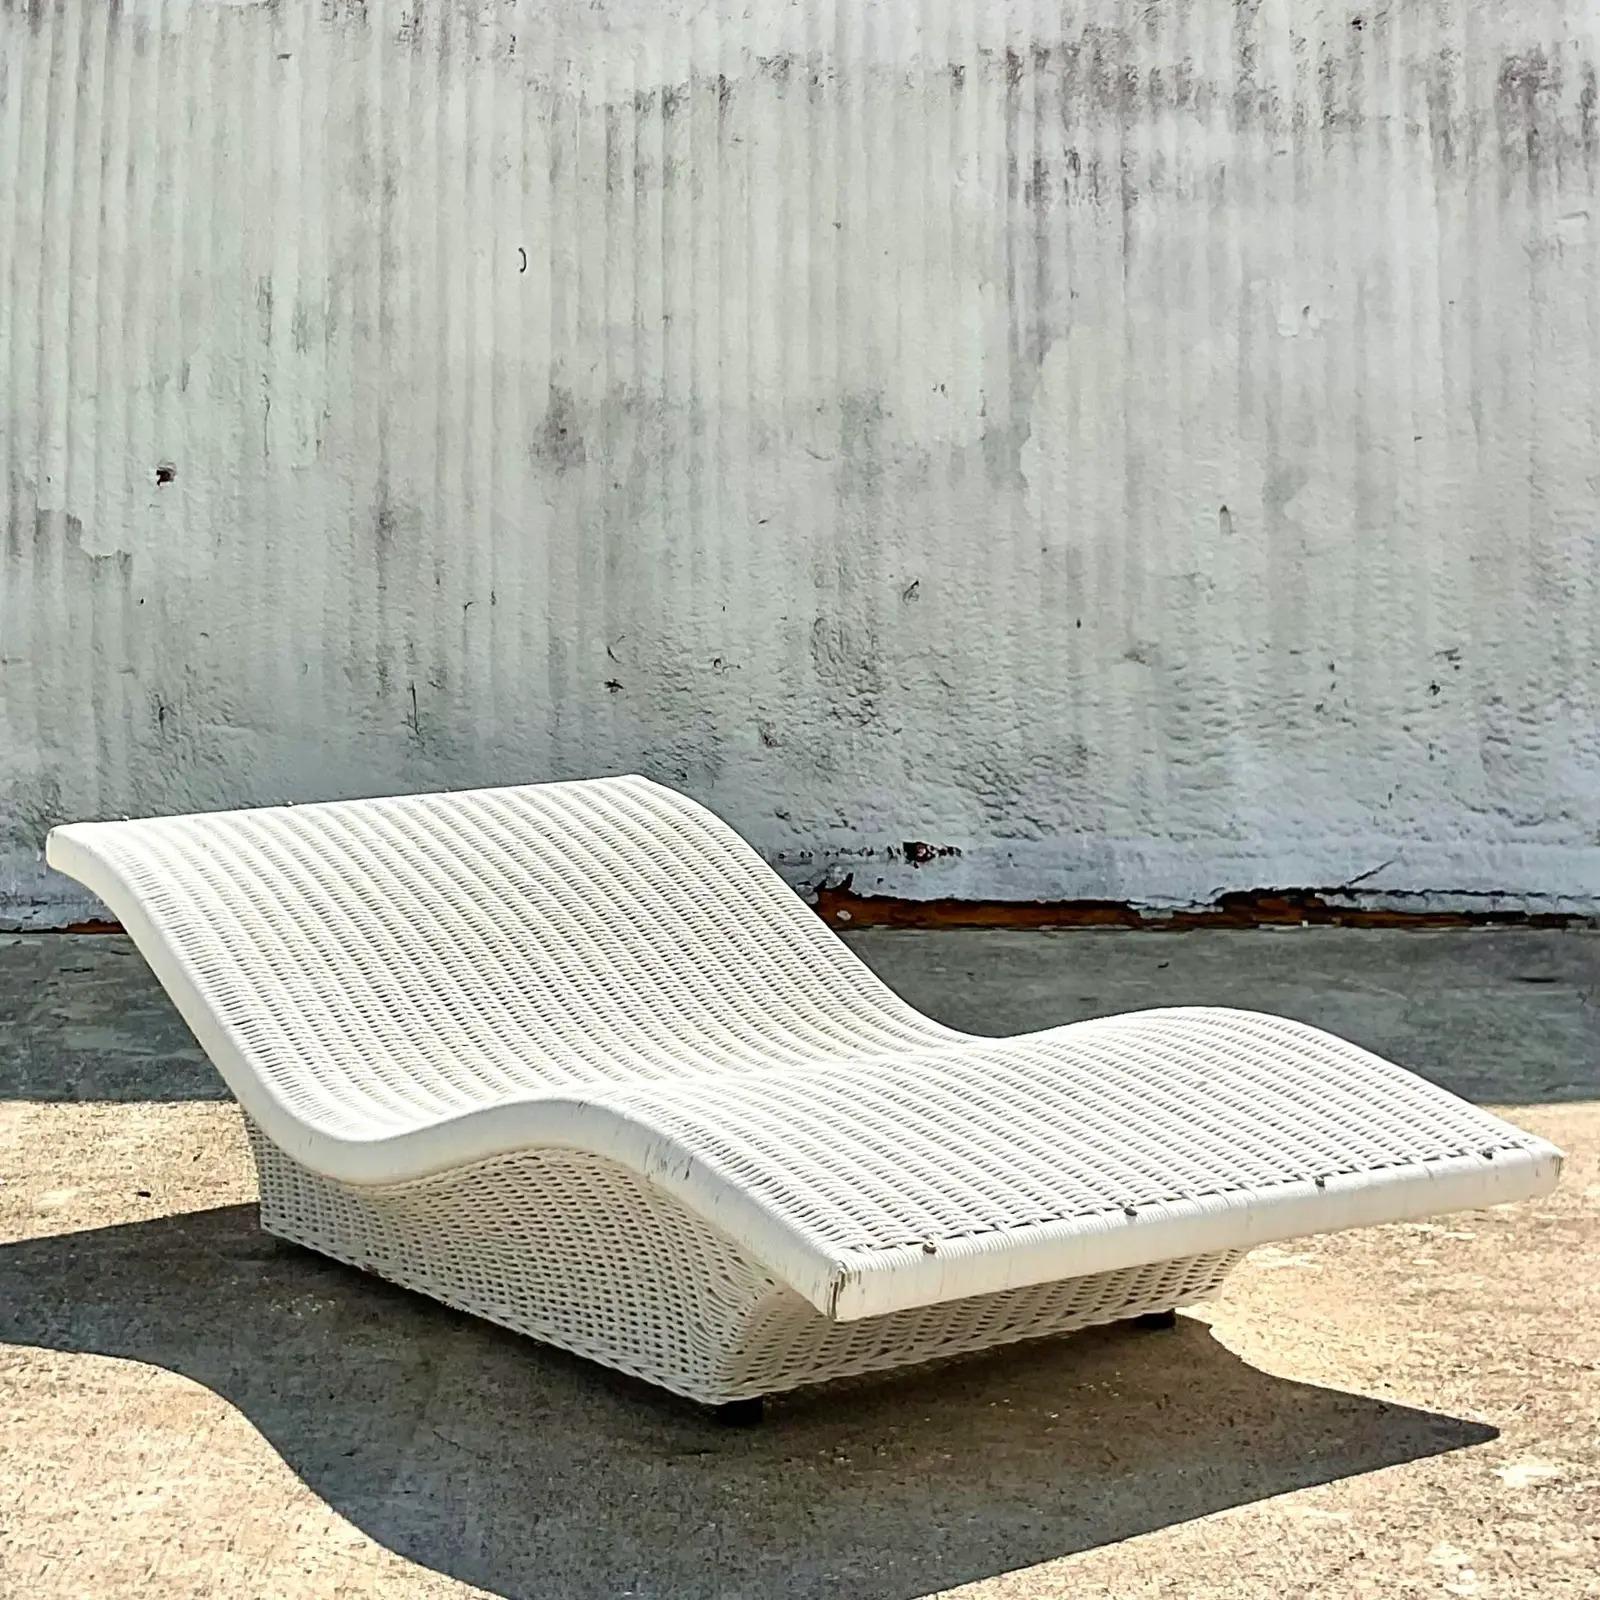 Fantastic vintage Coastal chaise lounge. A fantastic wave design in a white woven rattan. Big and roomy. Acquired from a Palm Beach estate.